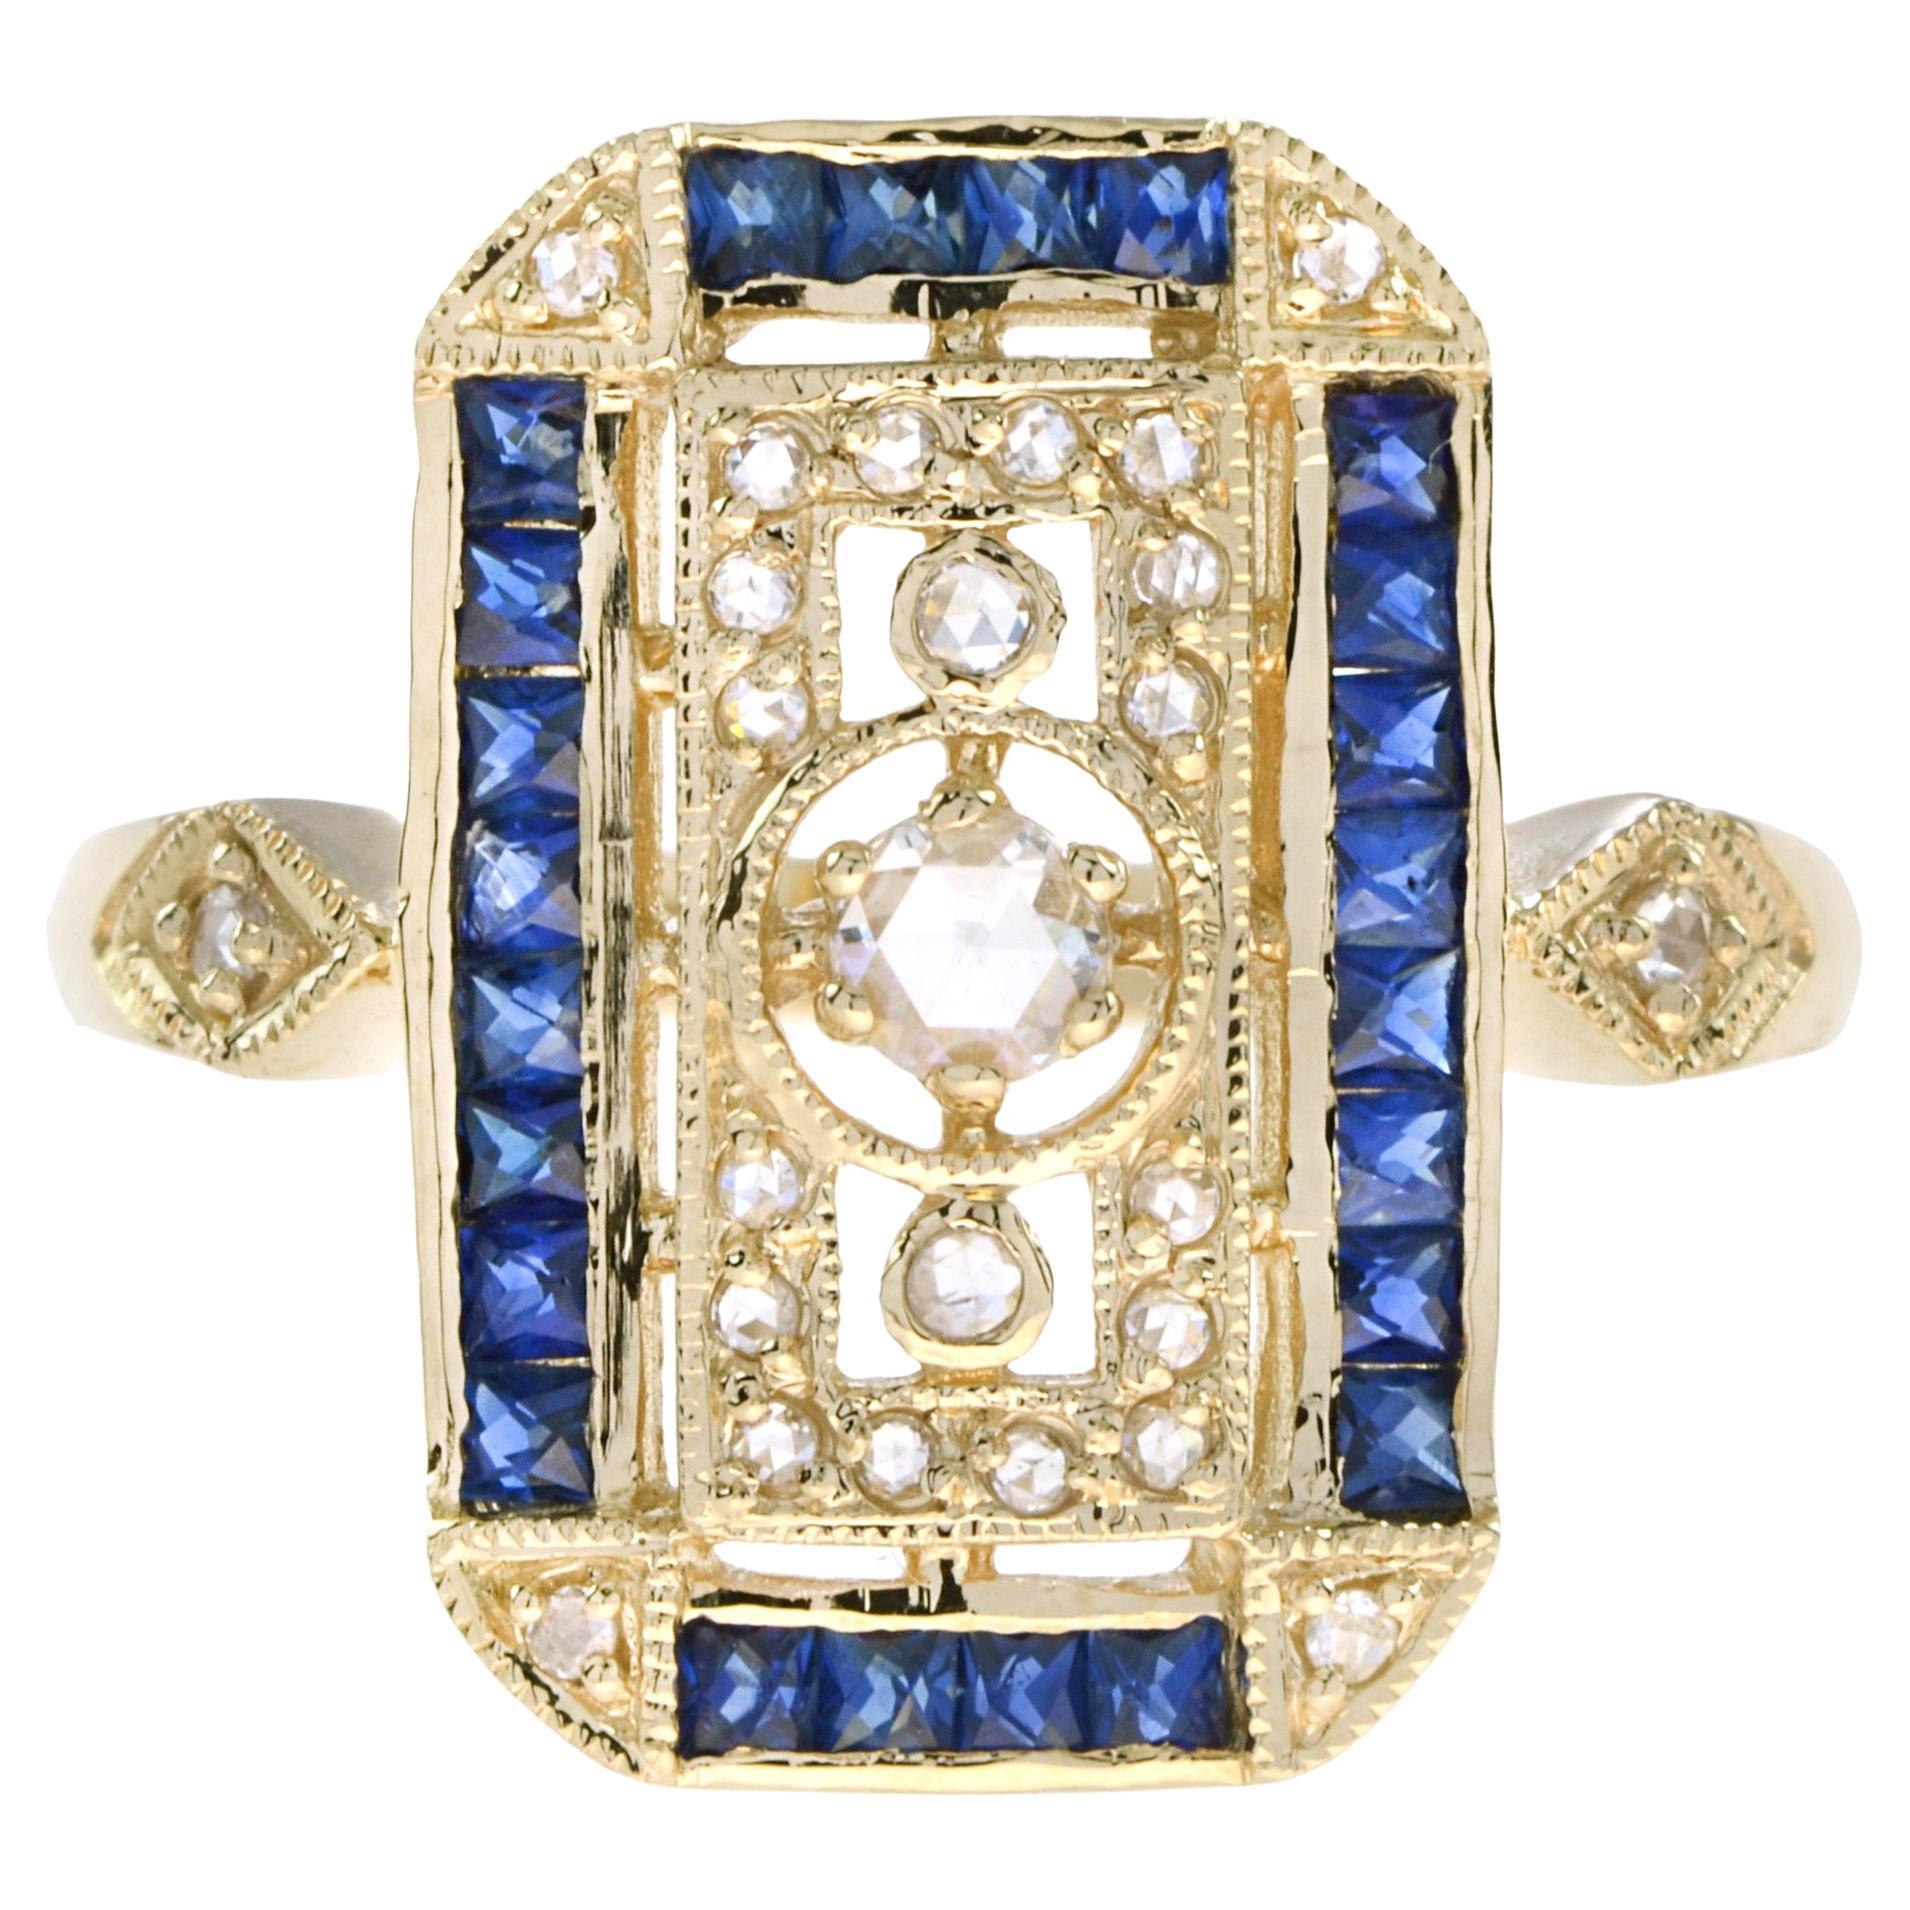 Old Cut Diamond and Sapphire Antique Style Filigree Ring in 14K Yellow Gold